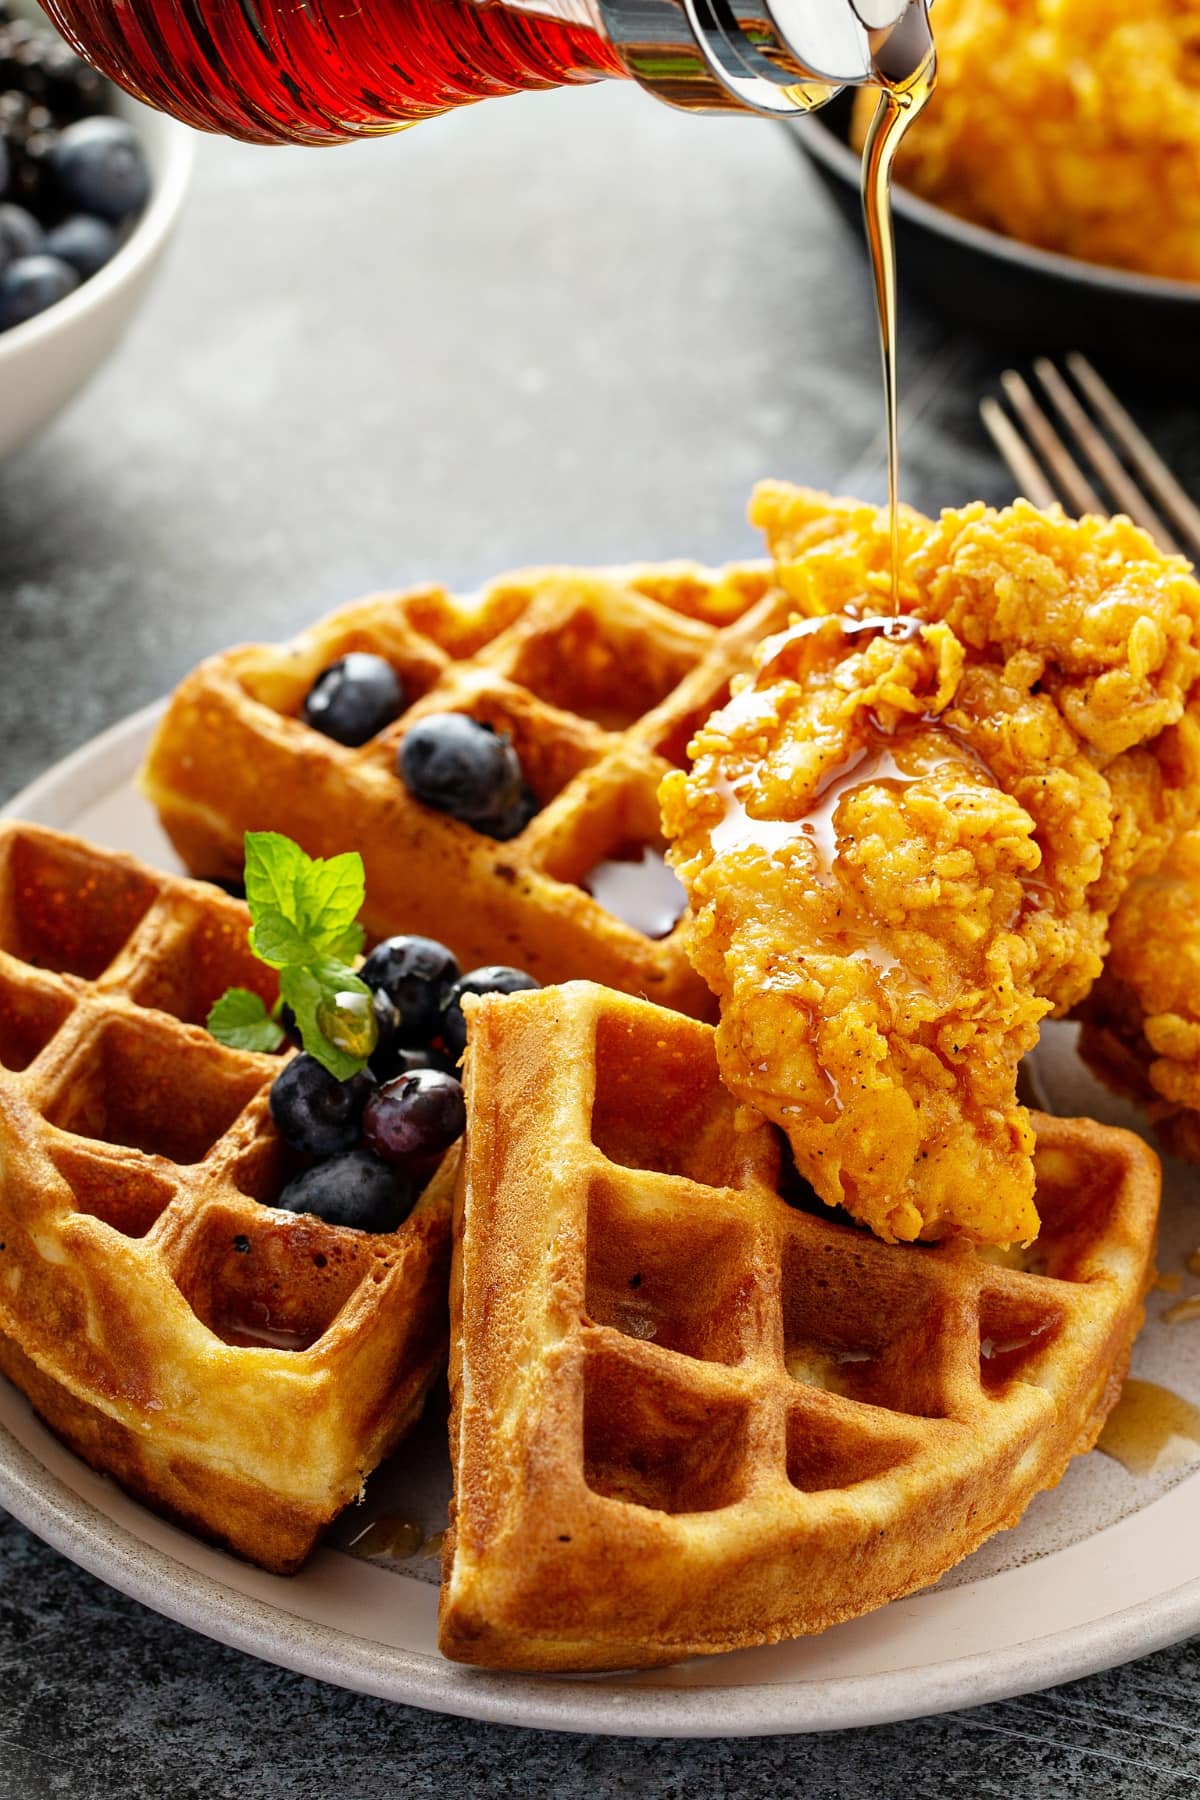 A plate of golden waffles adorned with a generous serving of fresh blueberries and crispy chicken